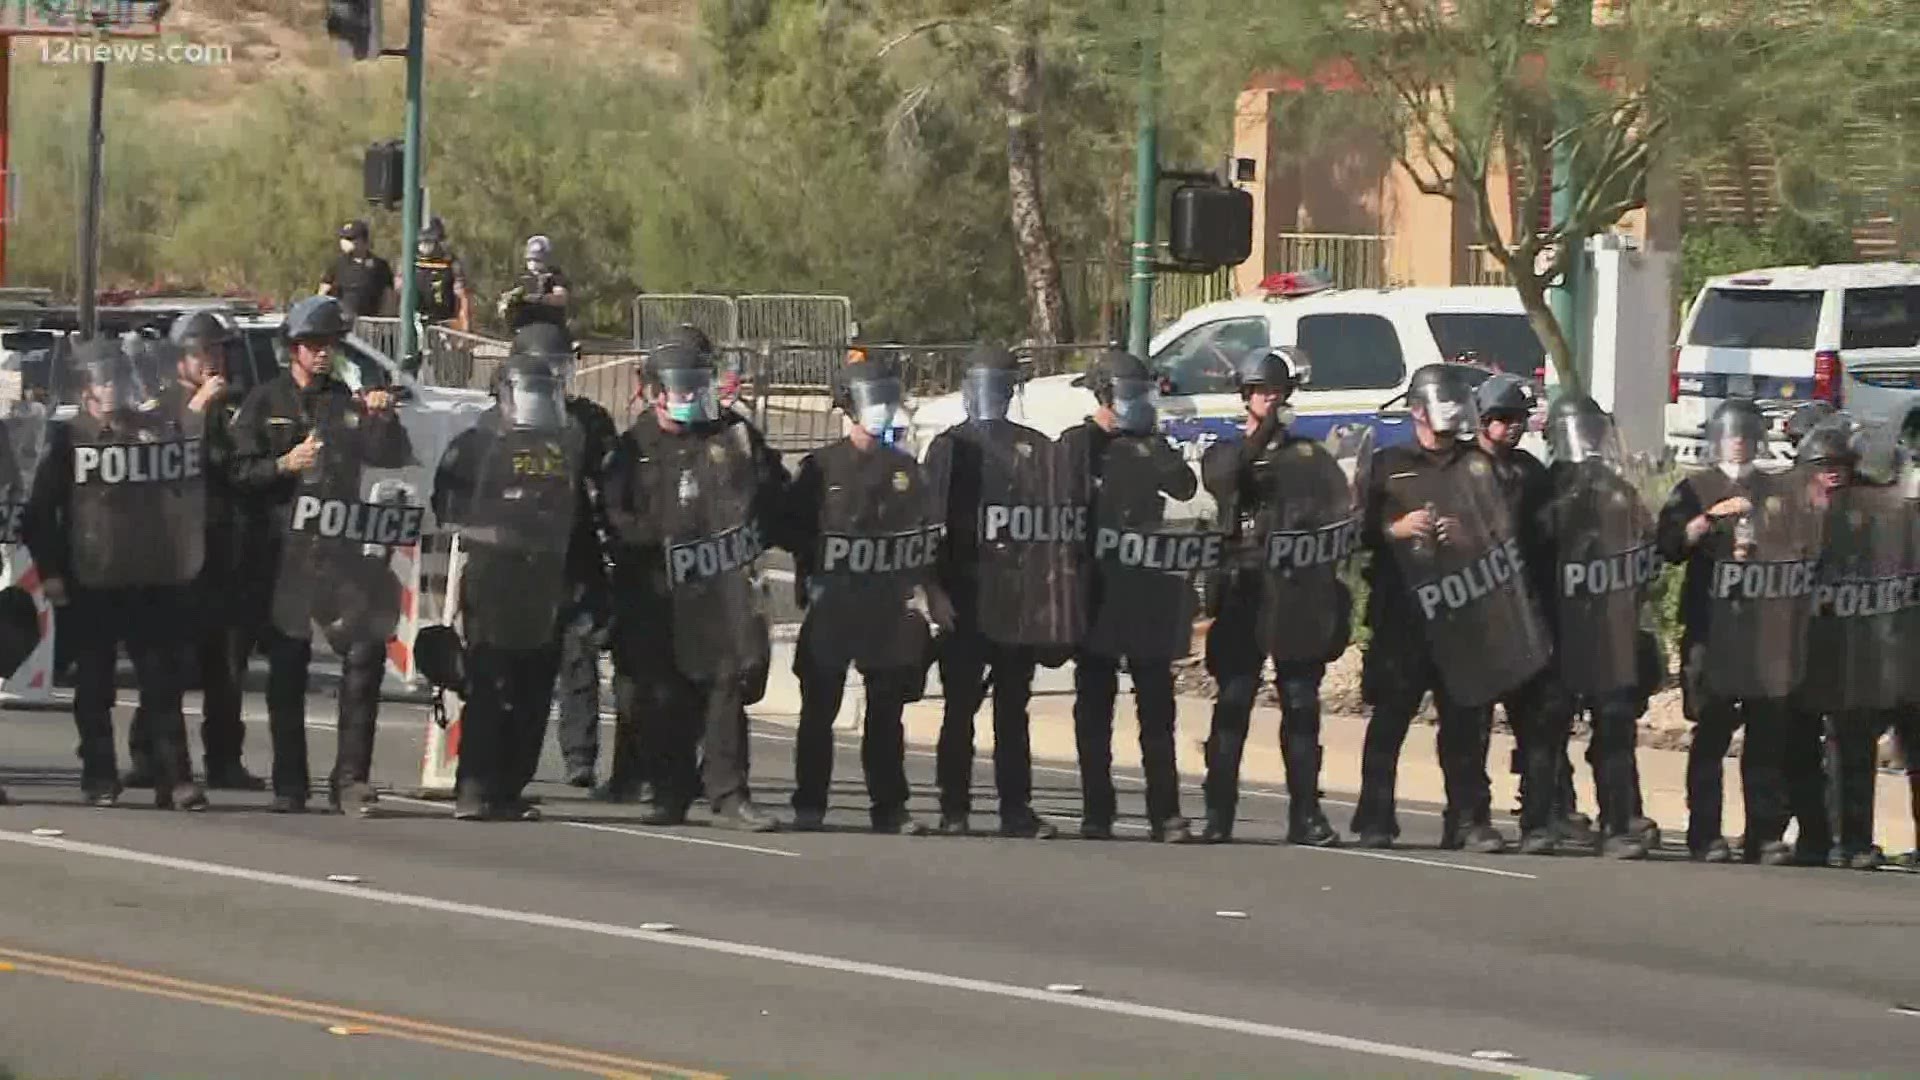 Phoenix police have declared a protest outside the Trump rally an unlawful assembly. 12 News reporter Micahel Doudna heard flashbangs before the declaration was made